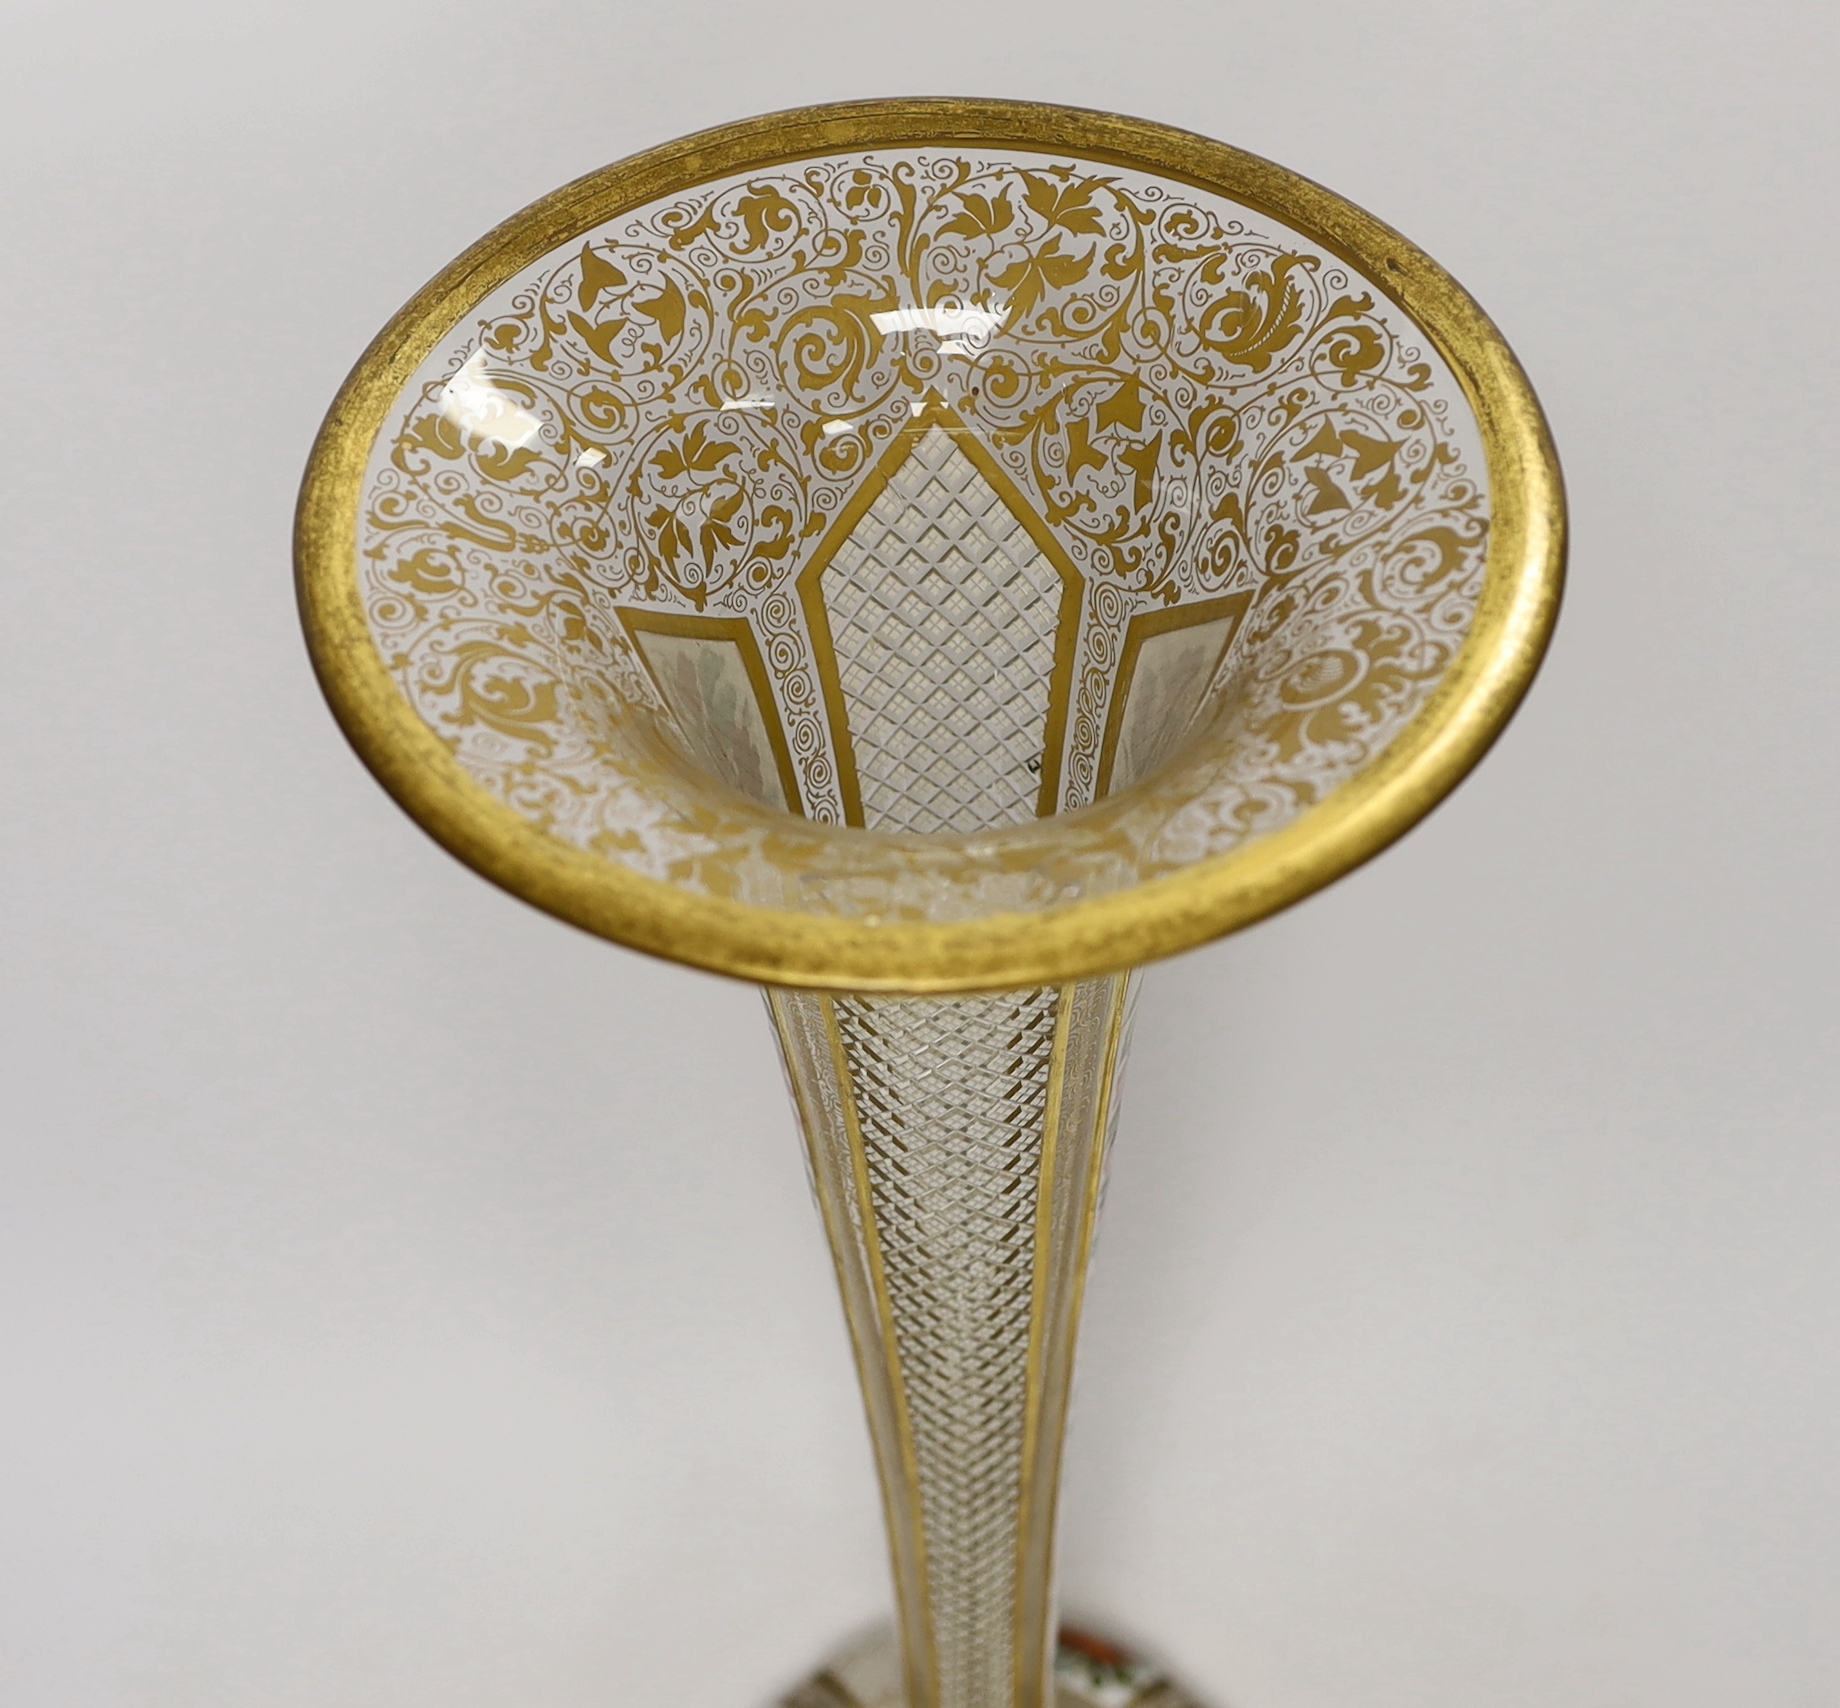 A large late 19th century Bohemian gilt and enamelled glass trumpet shaped vase, 50cm